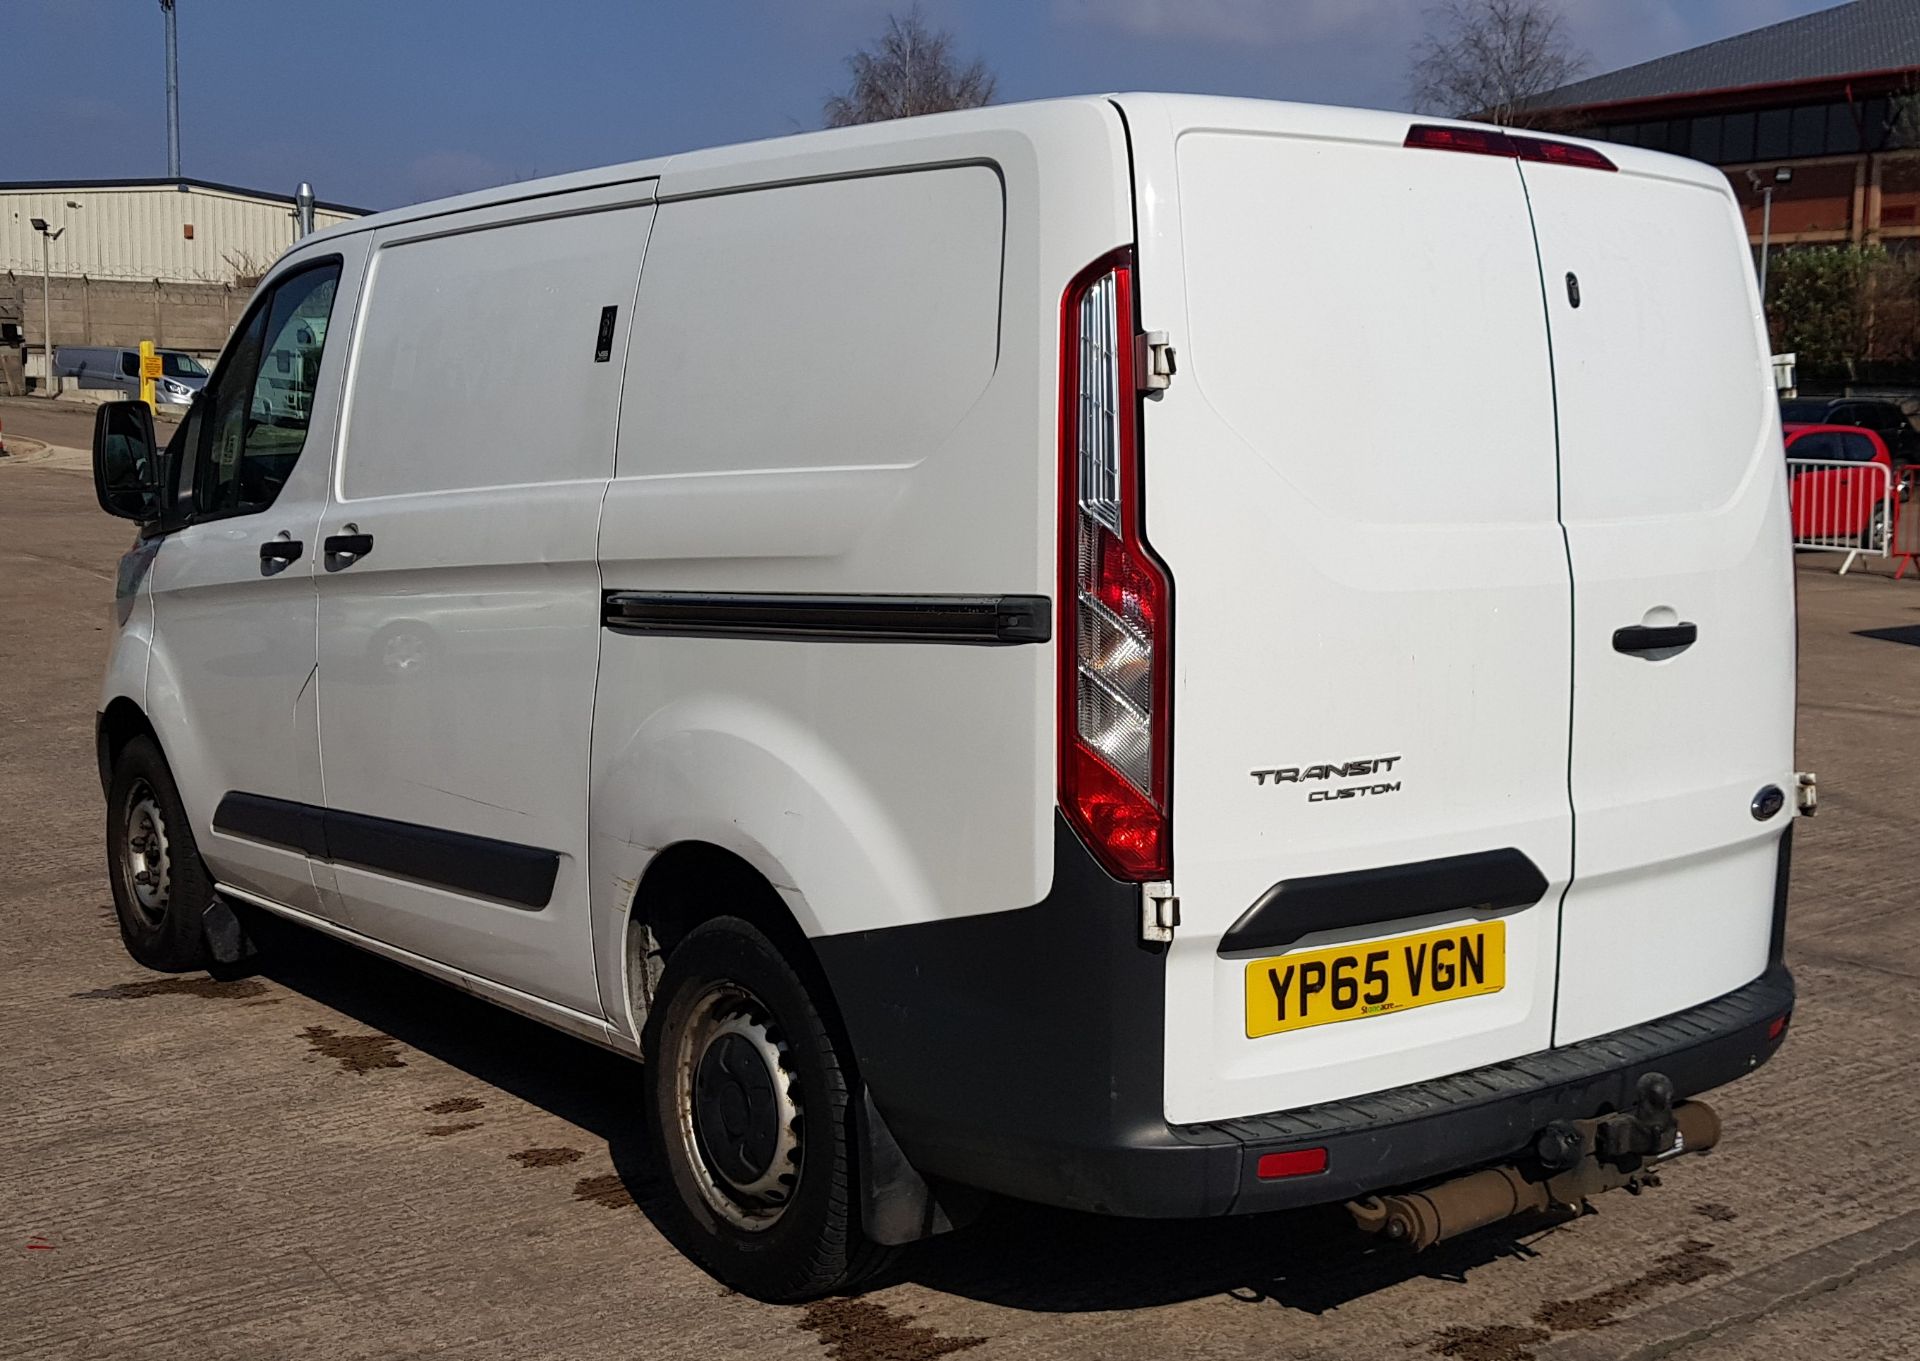 WHITE FORD TRANSIT CUSTOM 270 ECO TECH. ( DIESEL ) Reg : YP65 VGN, Mileage : 93,455 Details: FIRST - Image 3 of 13